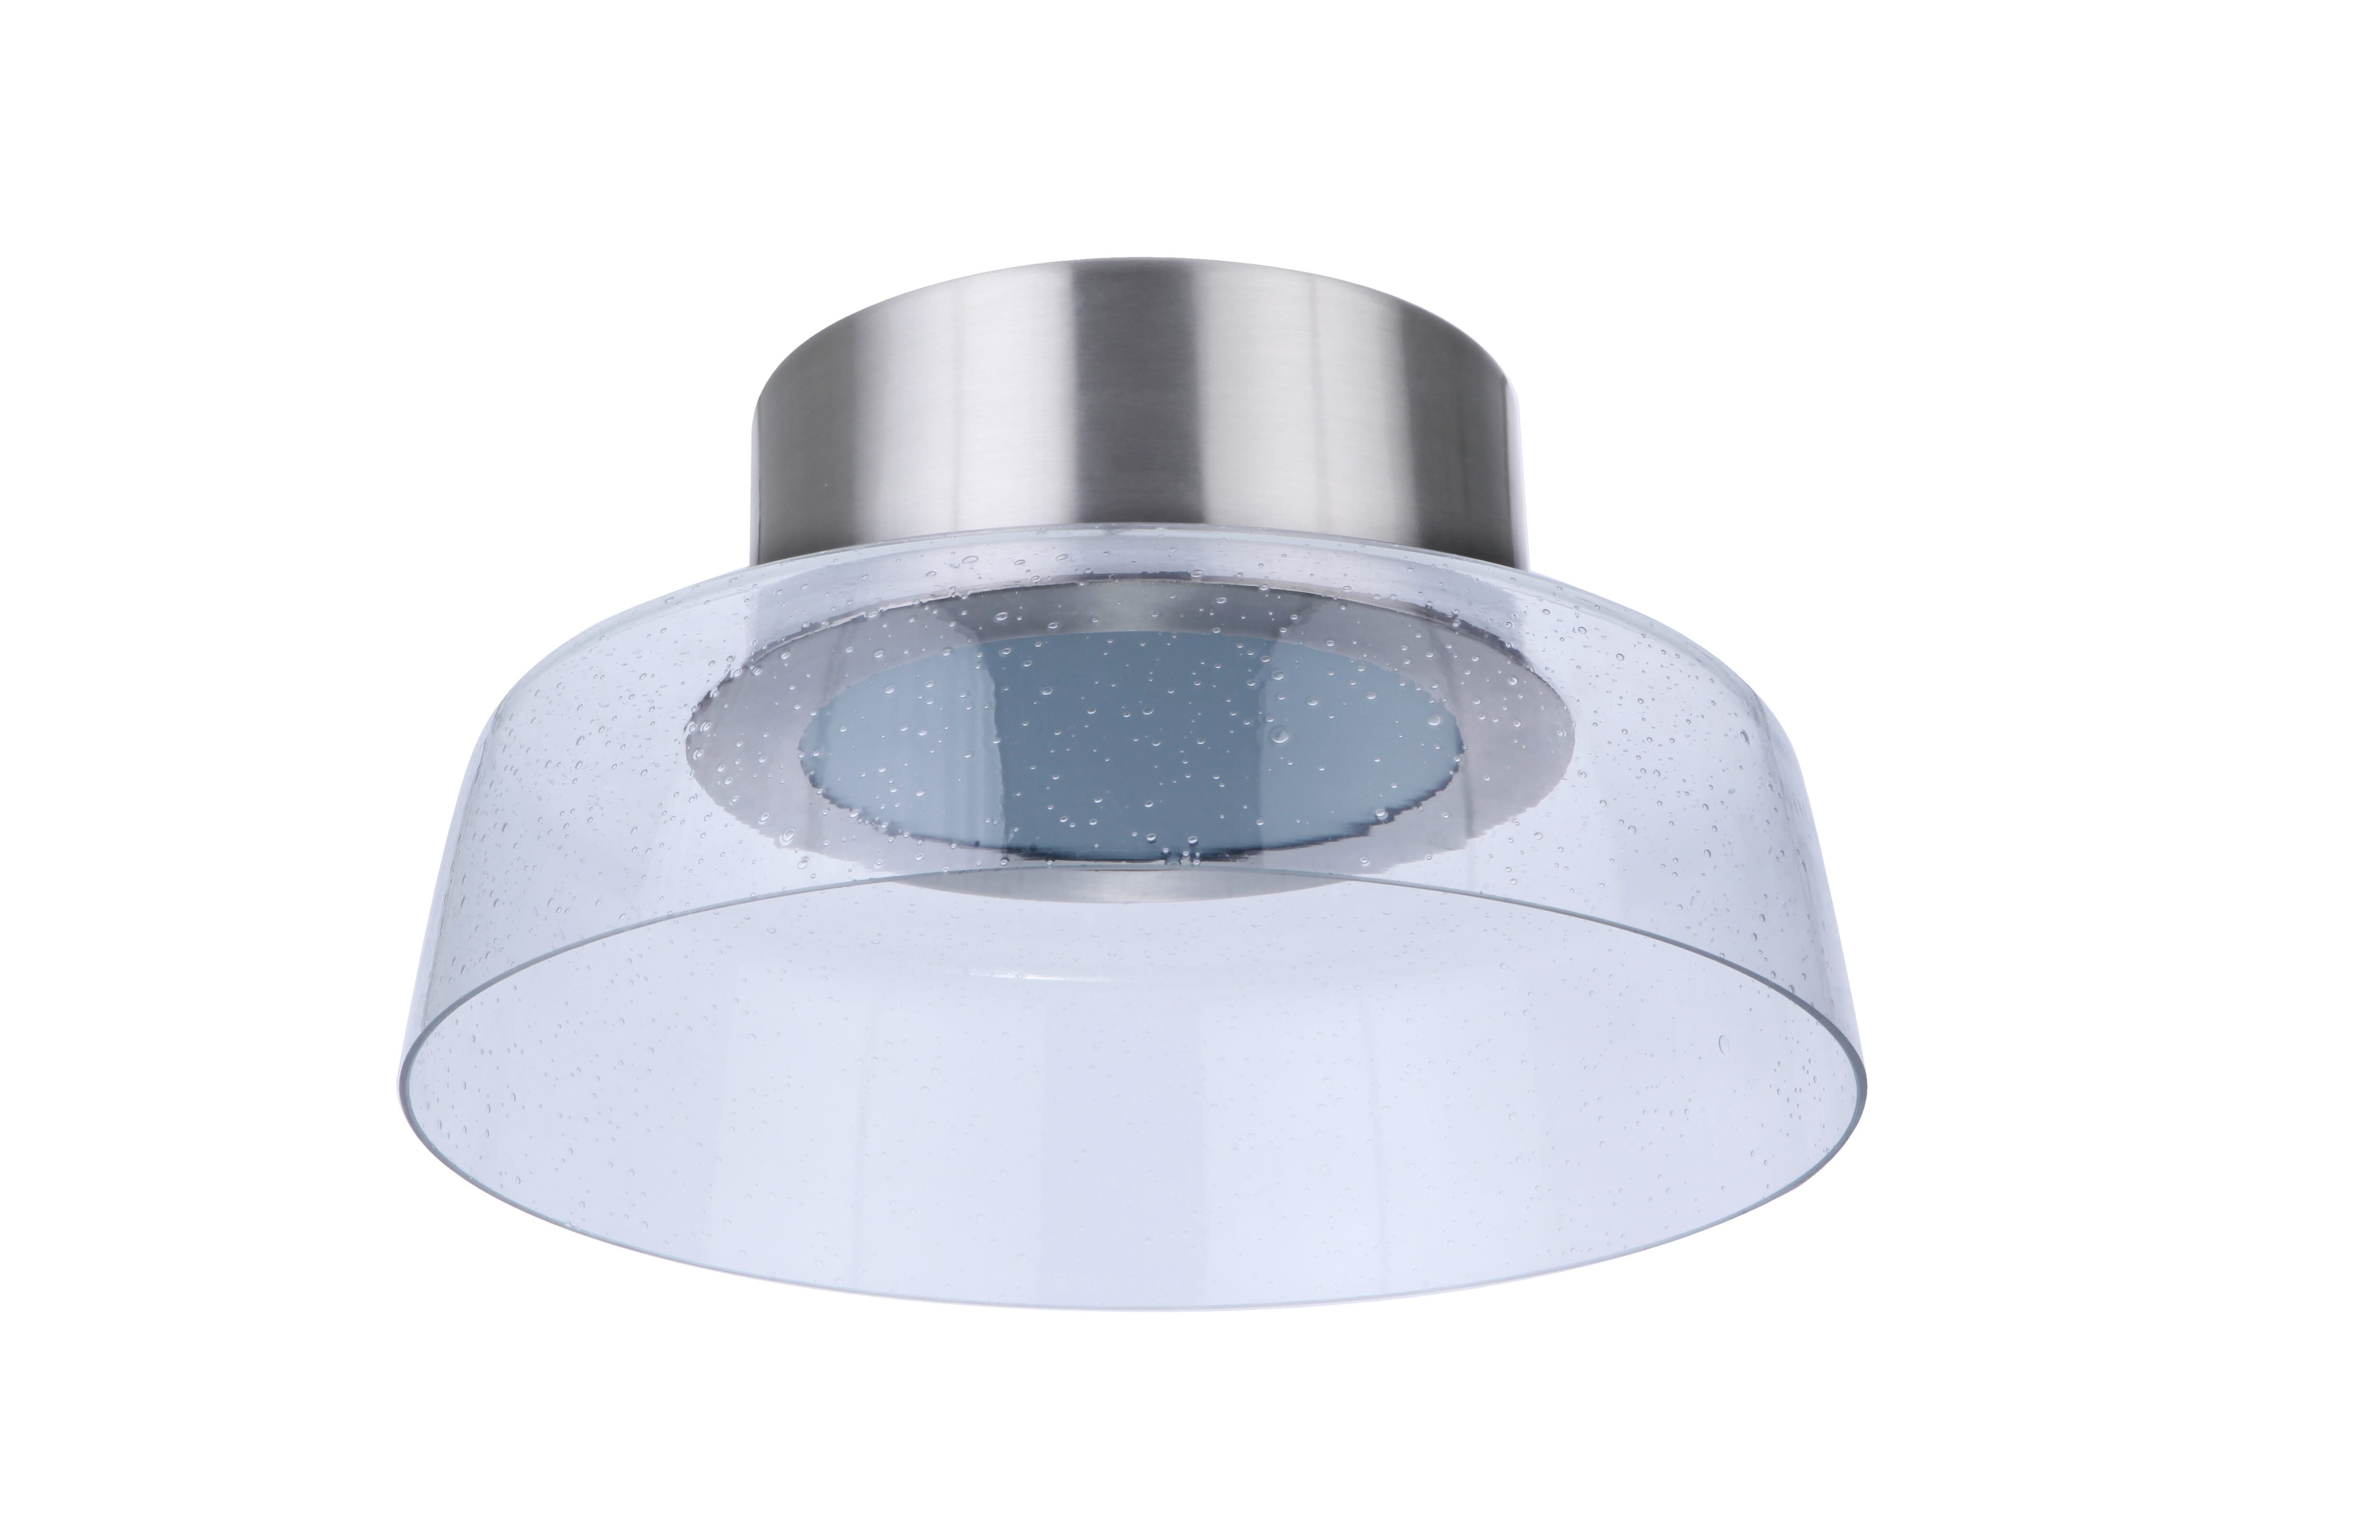 Centric Ceiling Light in Brushed Polished Nickel